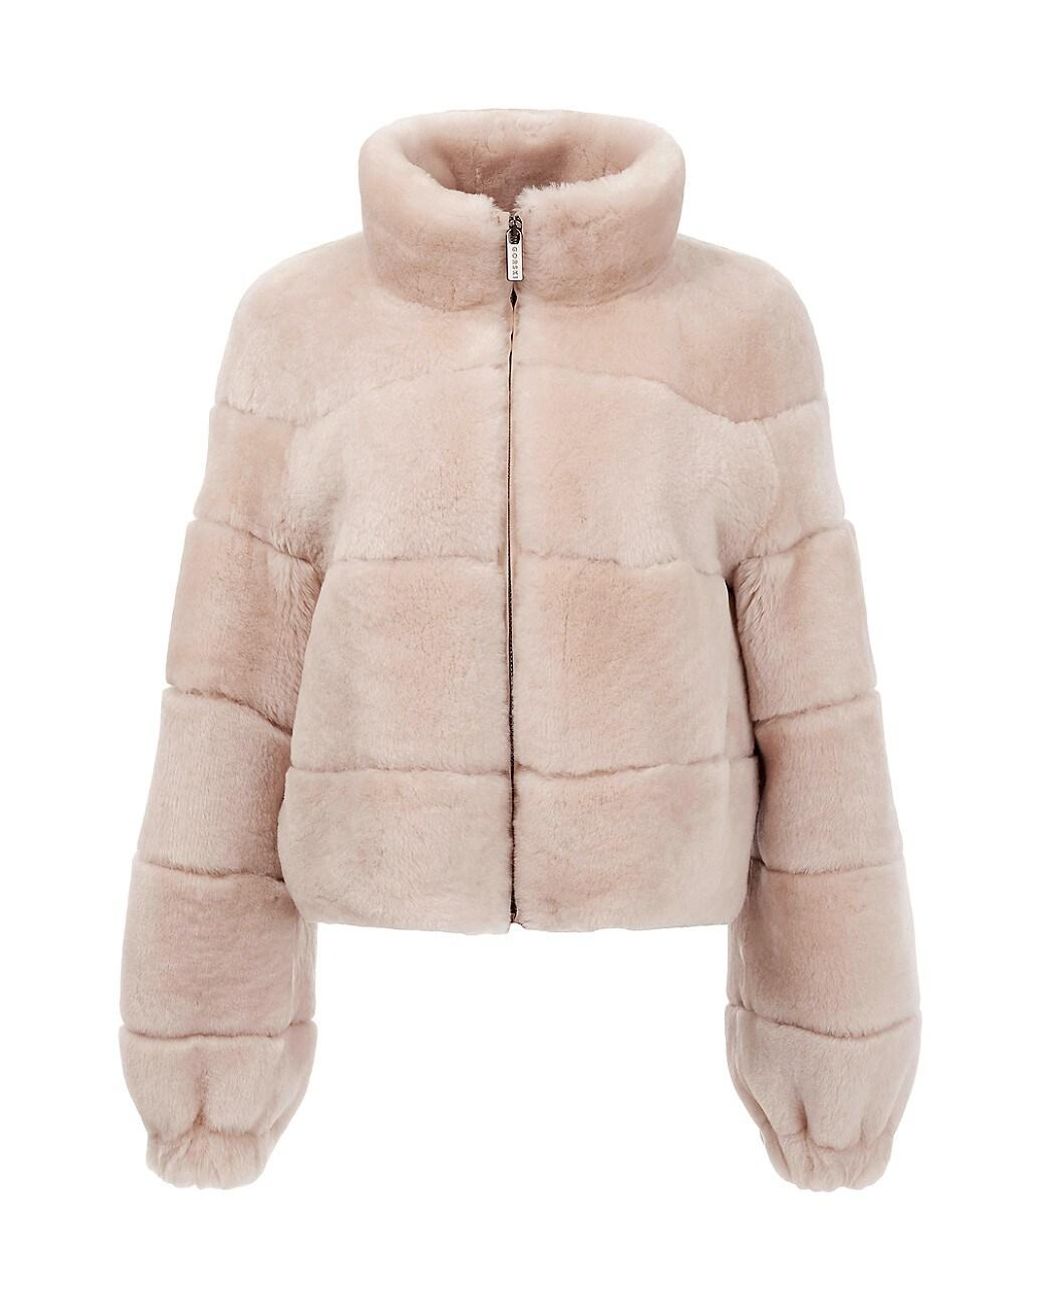 Gorski Cropped Shearling Lamb Jacket in Beige (Natural) | Lyst